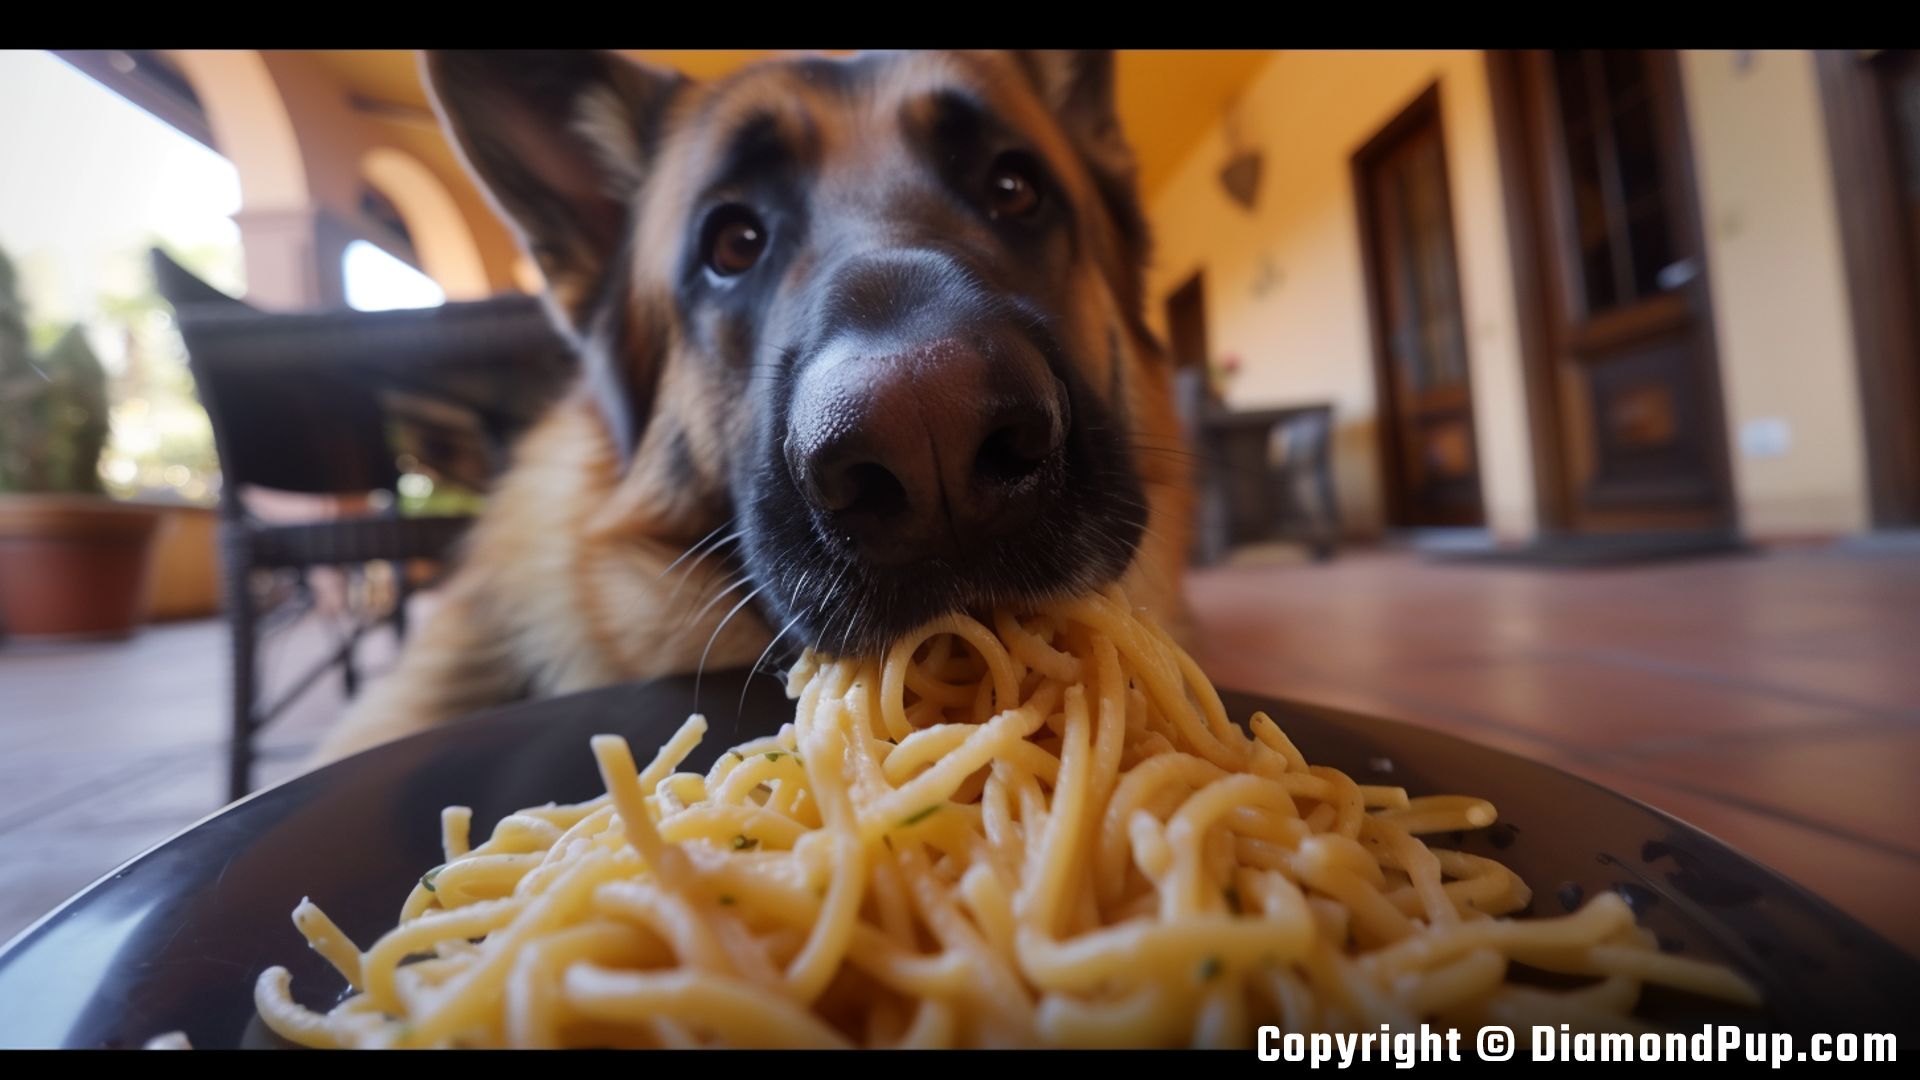 Photograph of an Adorable German Shepherd Snacking on Pasta